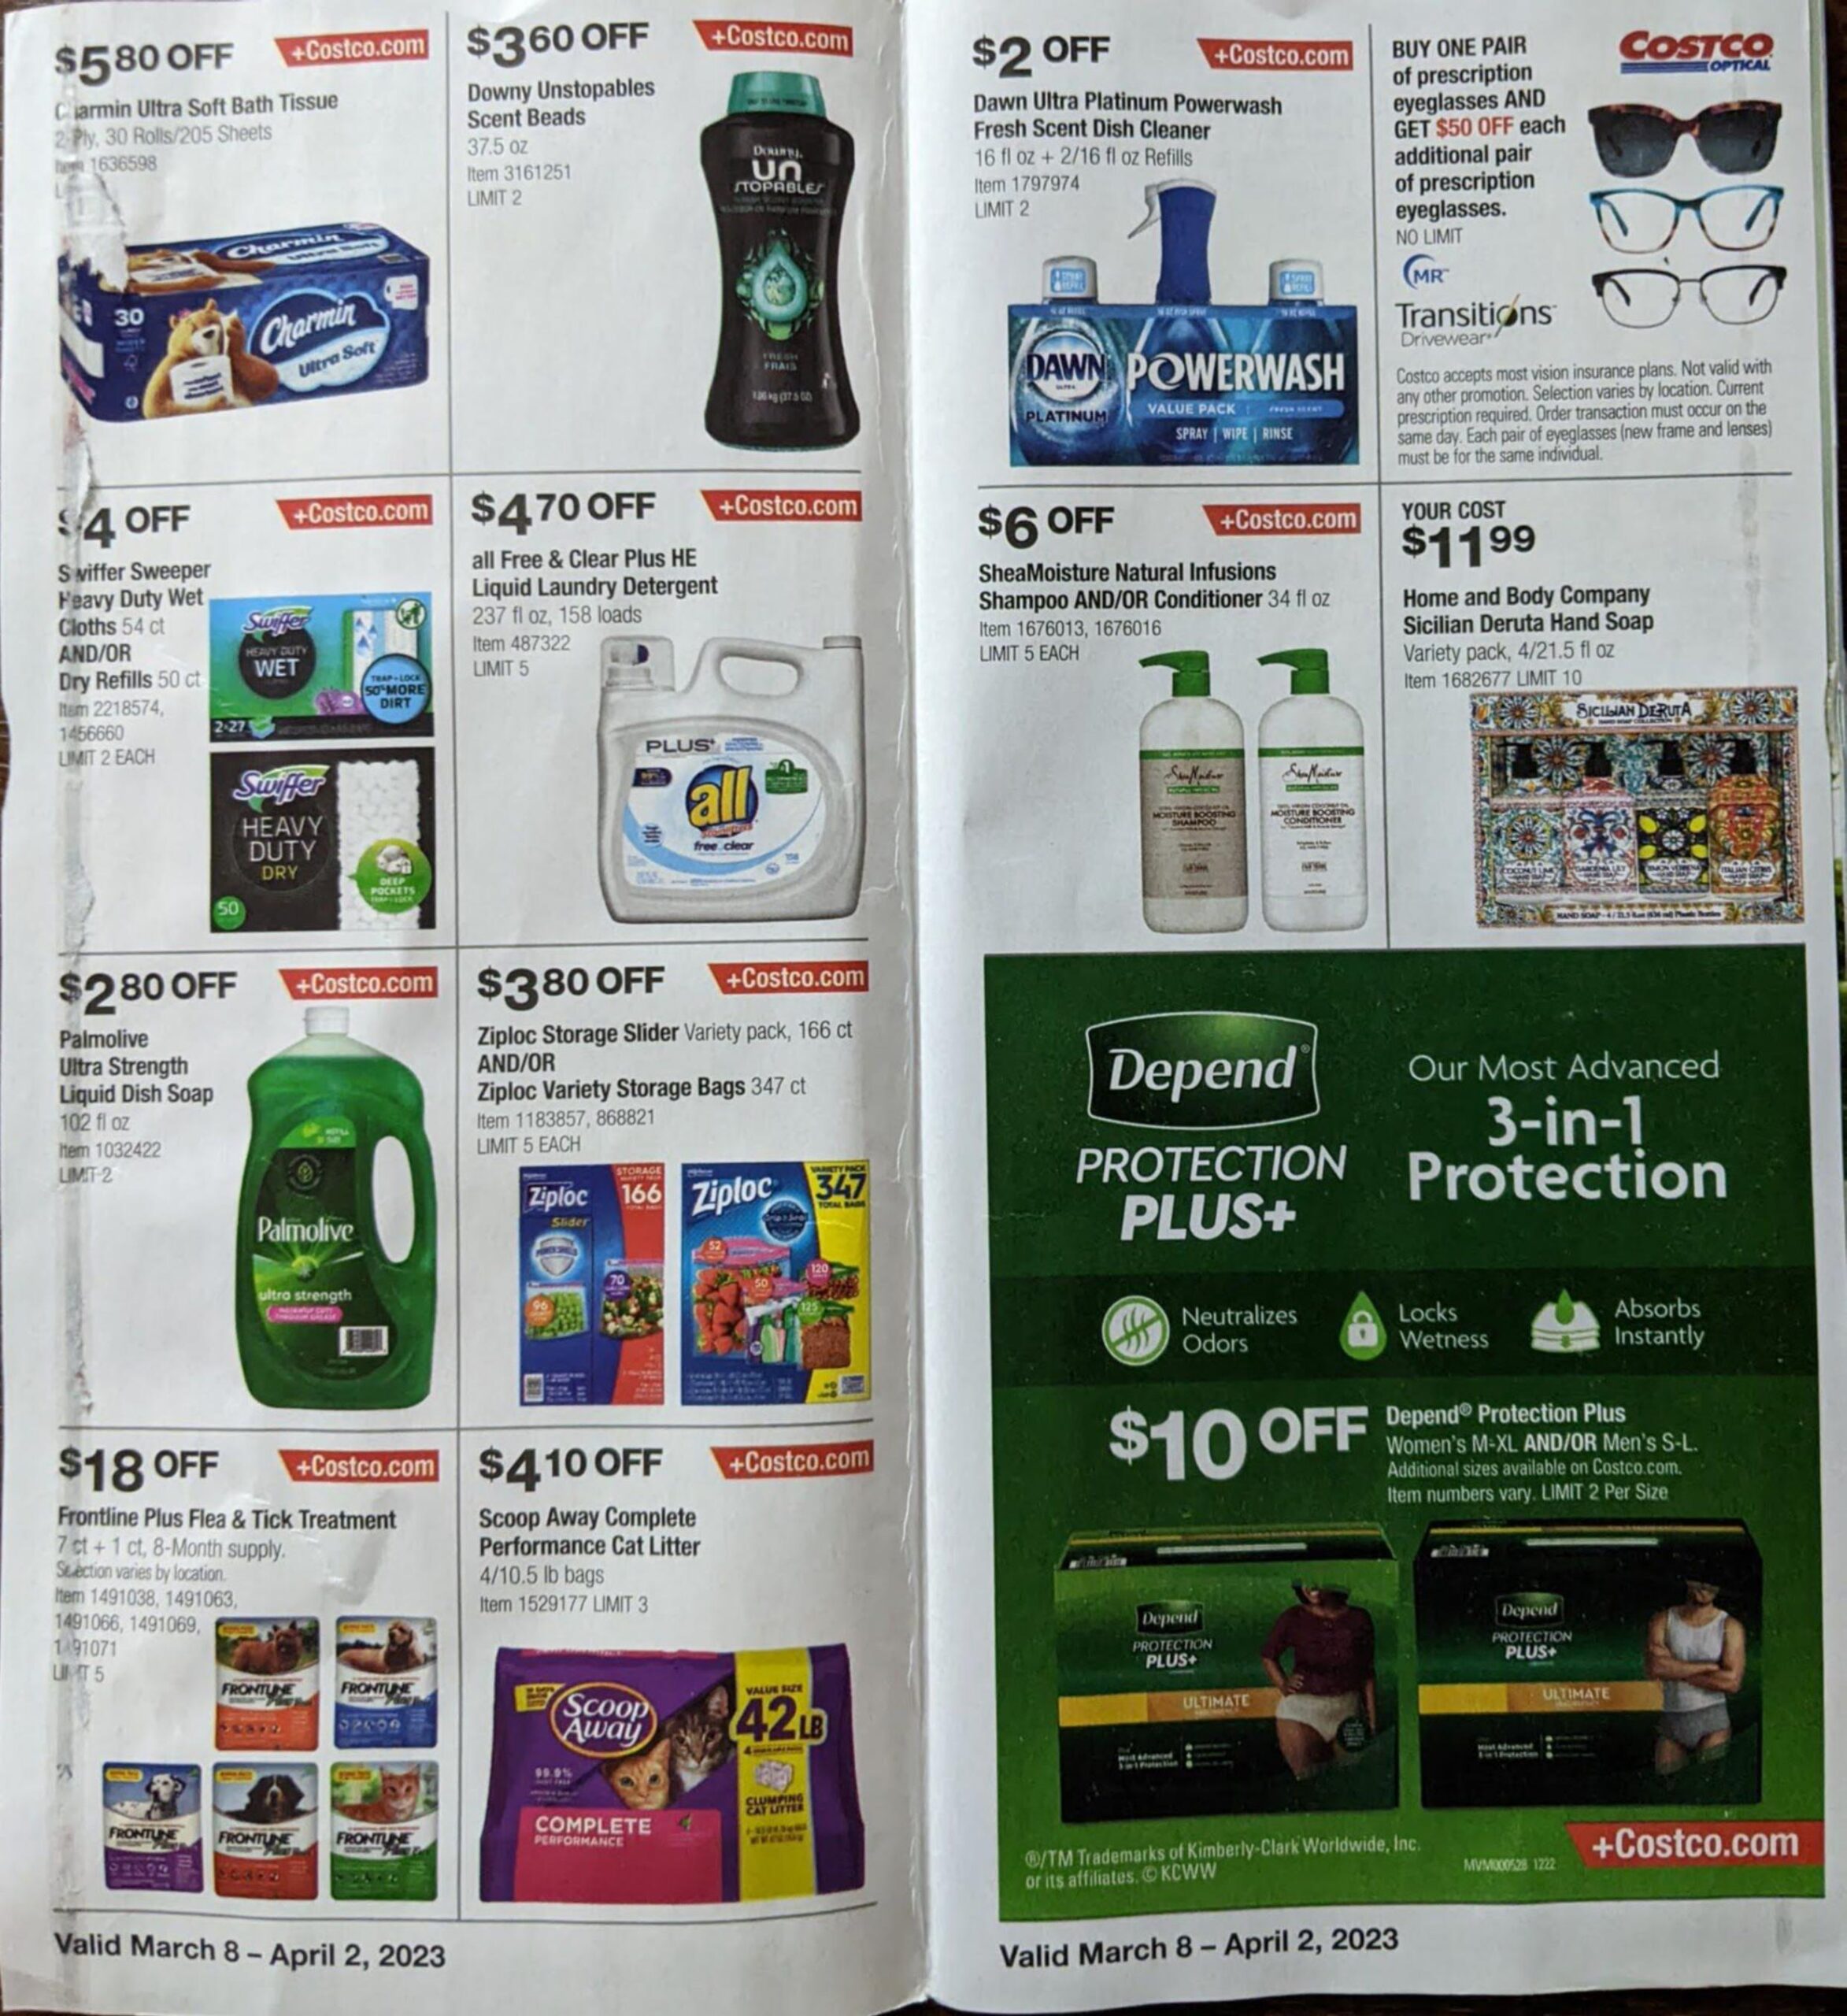 Costco Coupon Book March 2023